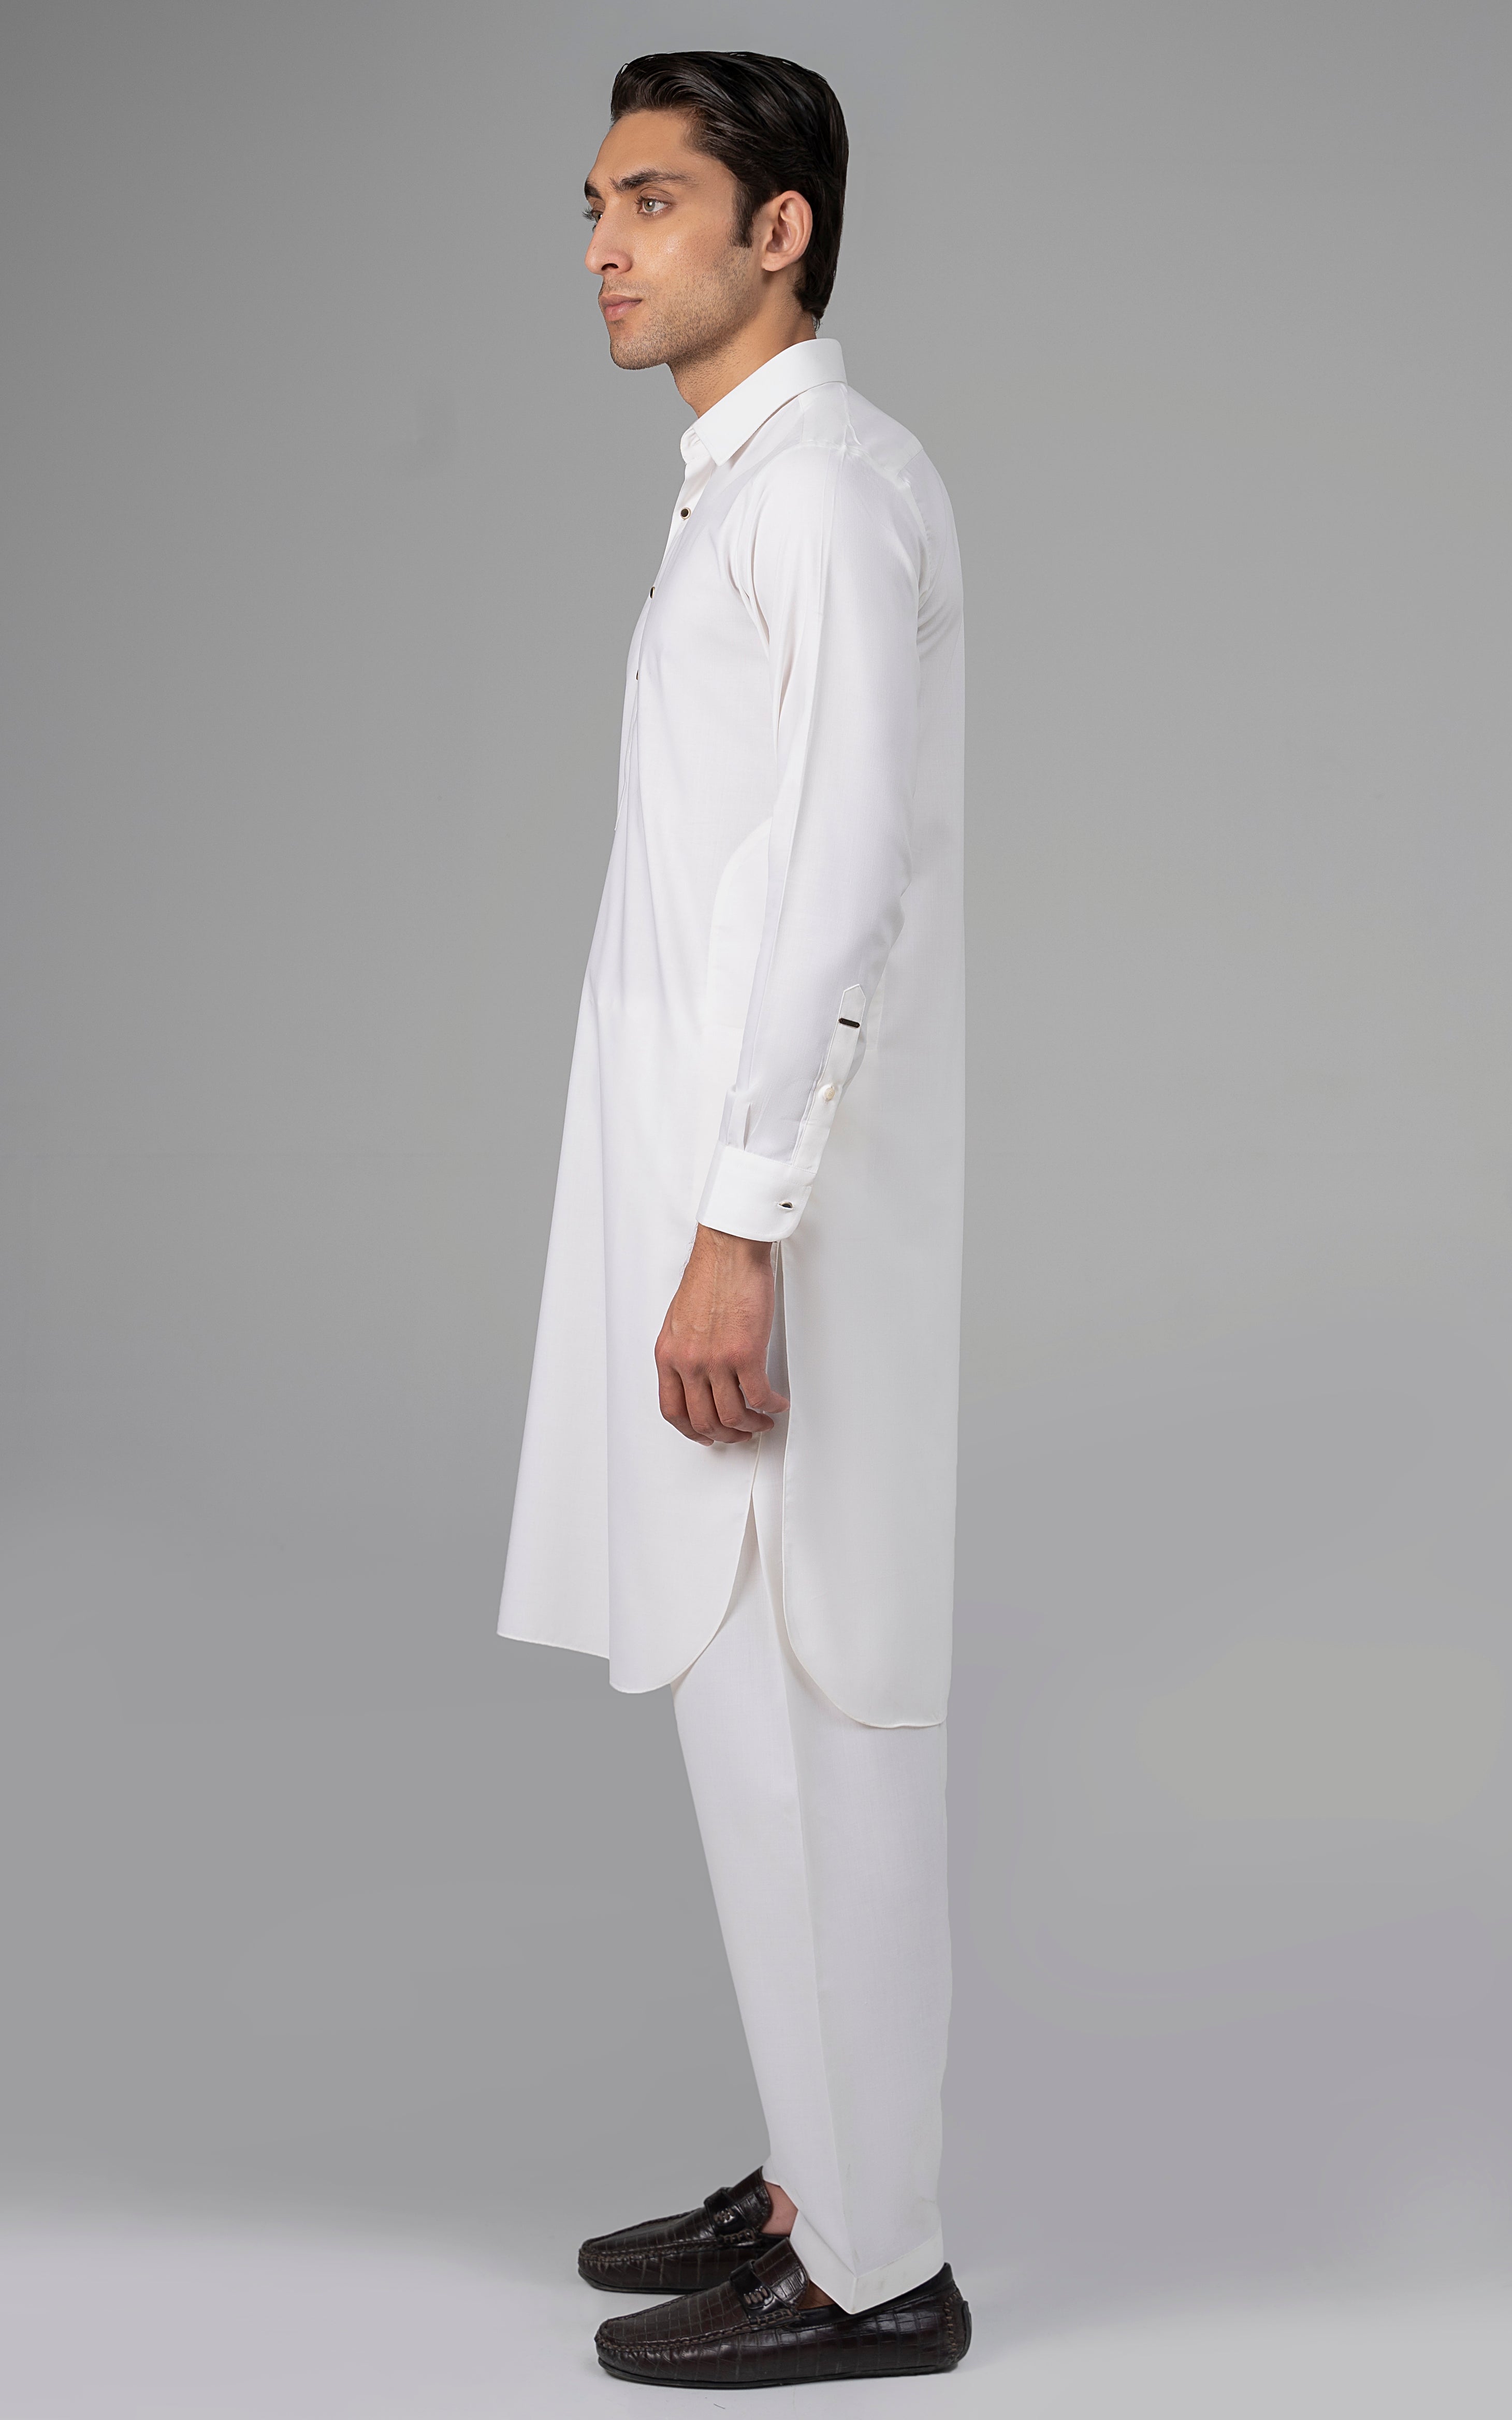 BLENDED WASH & WEAR - PREMIUM COLLECTION OFF WHITE